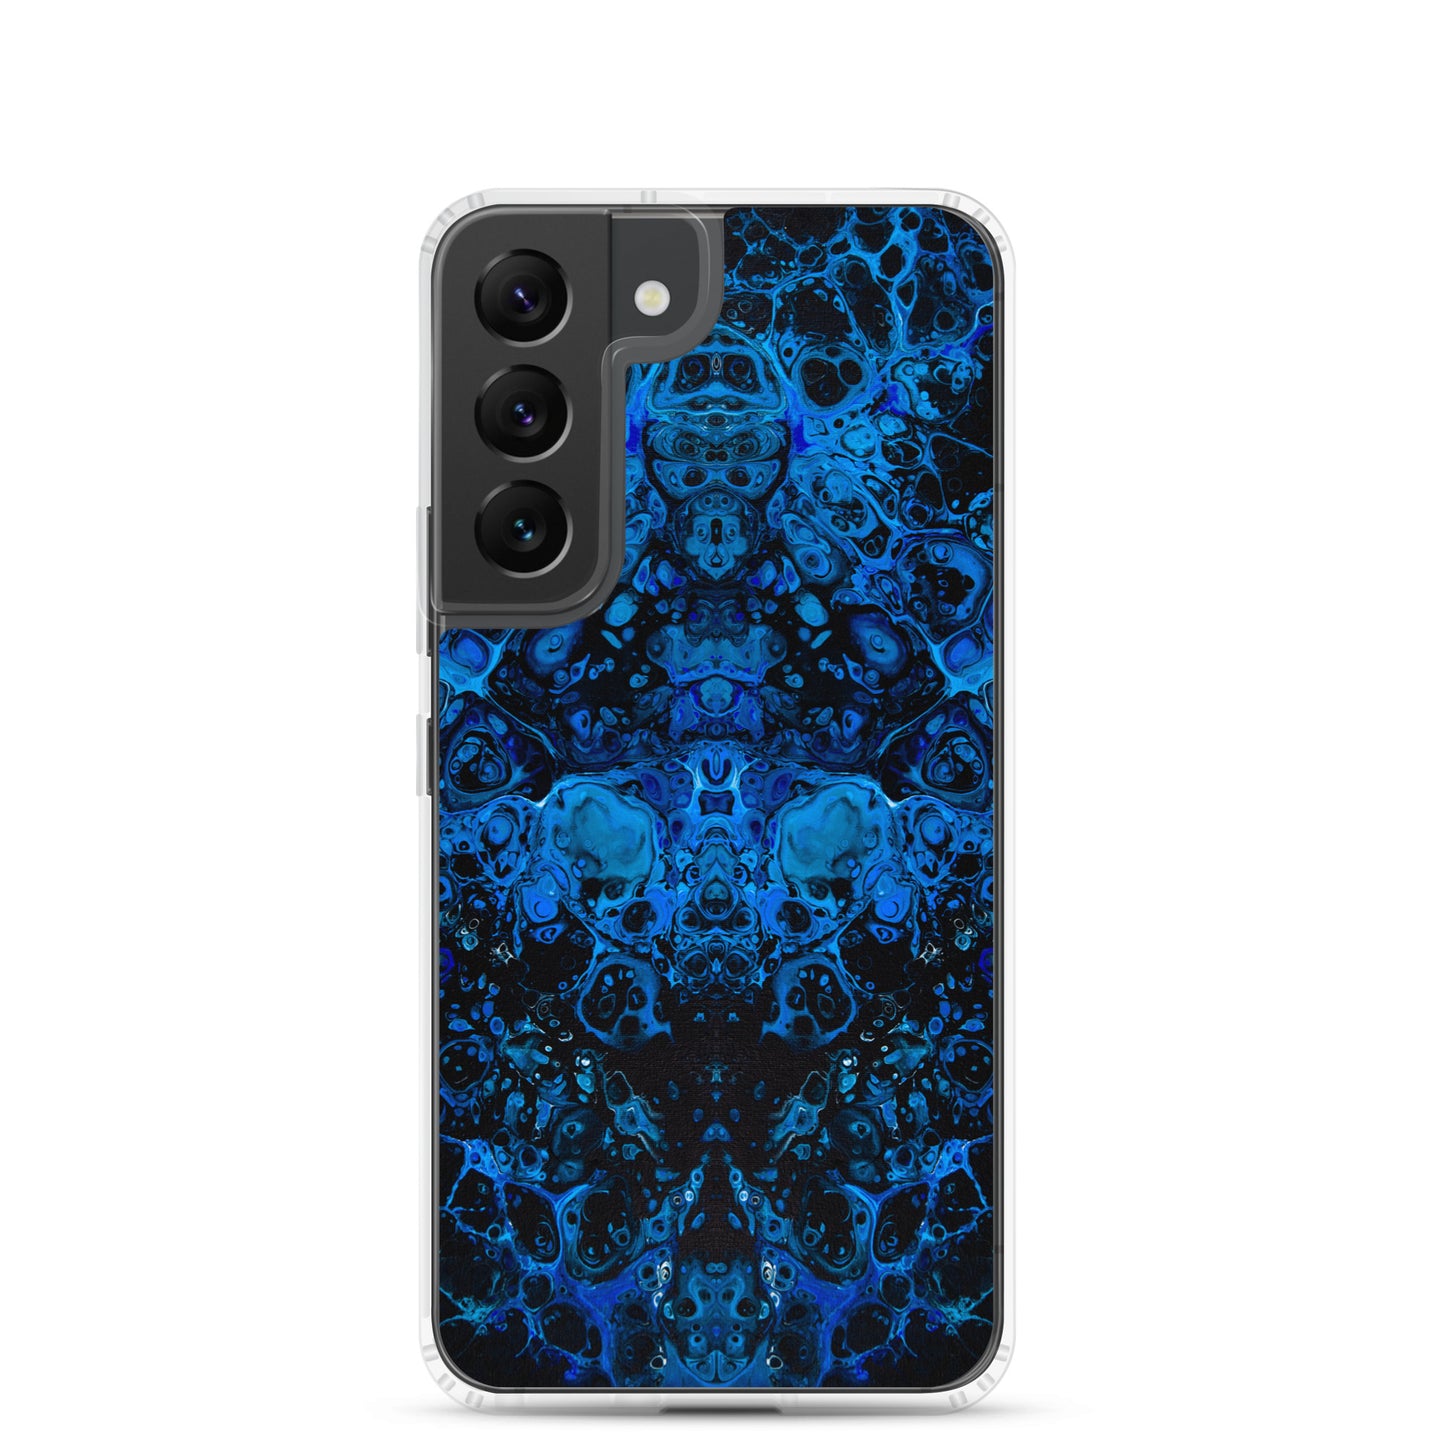 NightOwl Studio Custom Phone Case Compatible with Samsung Galaxy, Slim Cover for Wireless Charging, Drop and Scratch Resistant, Azul